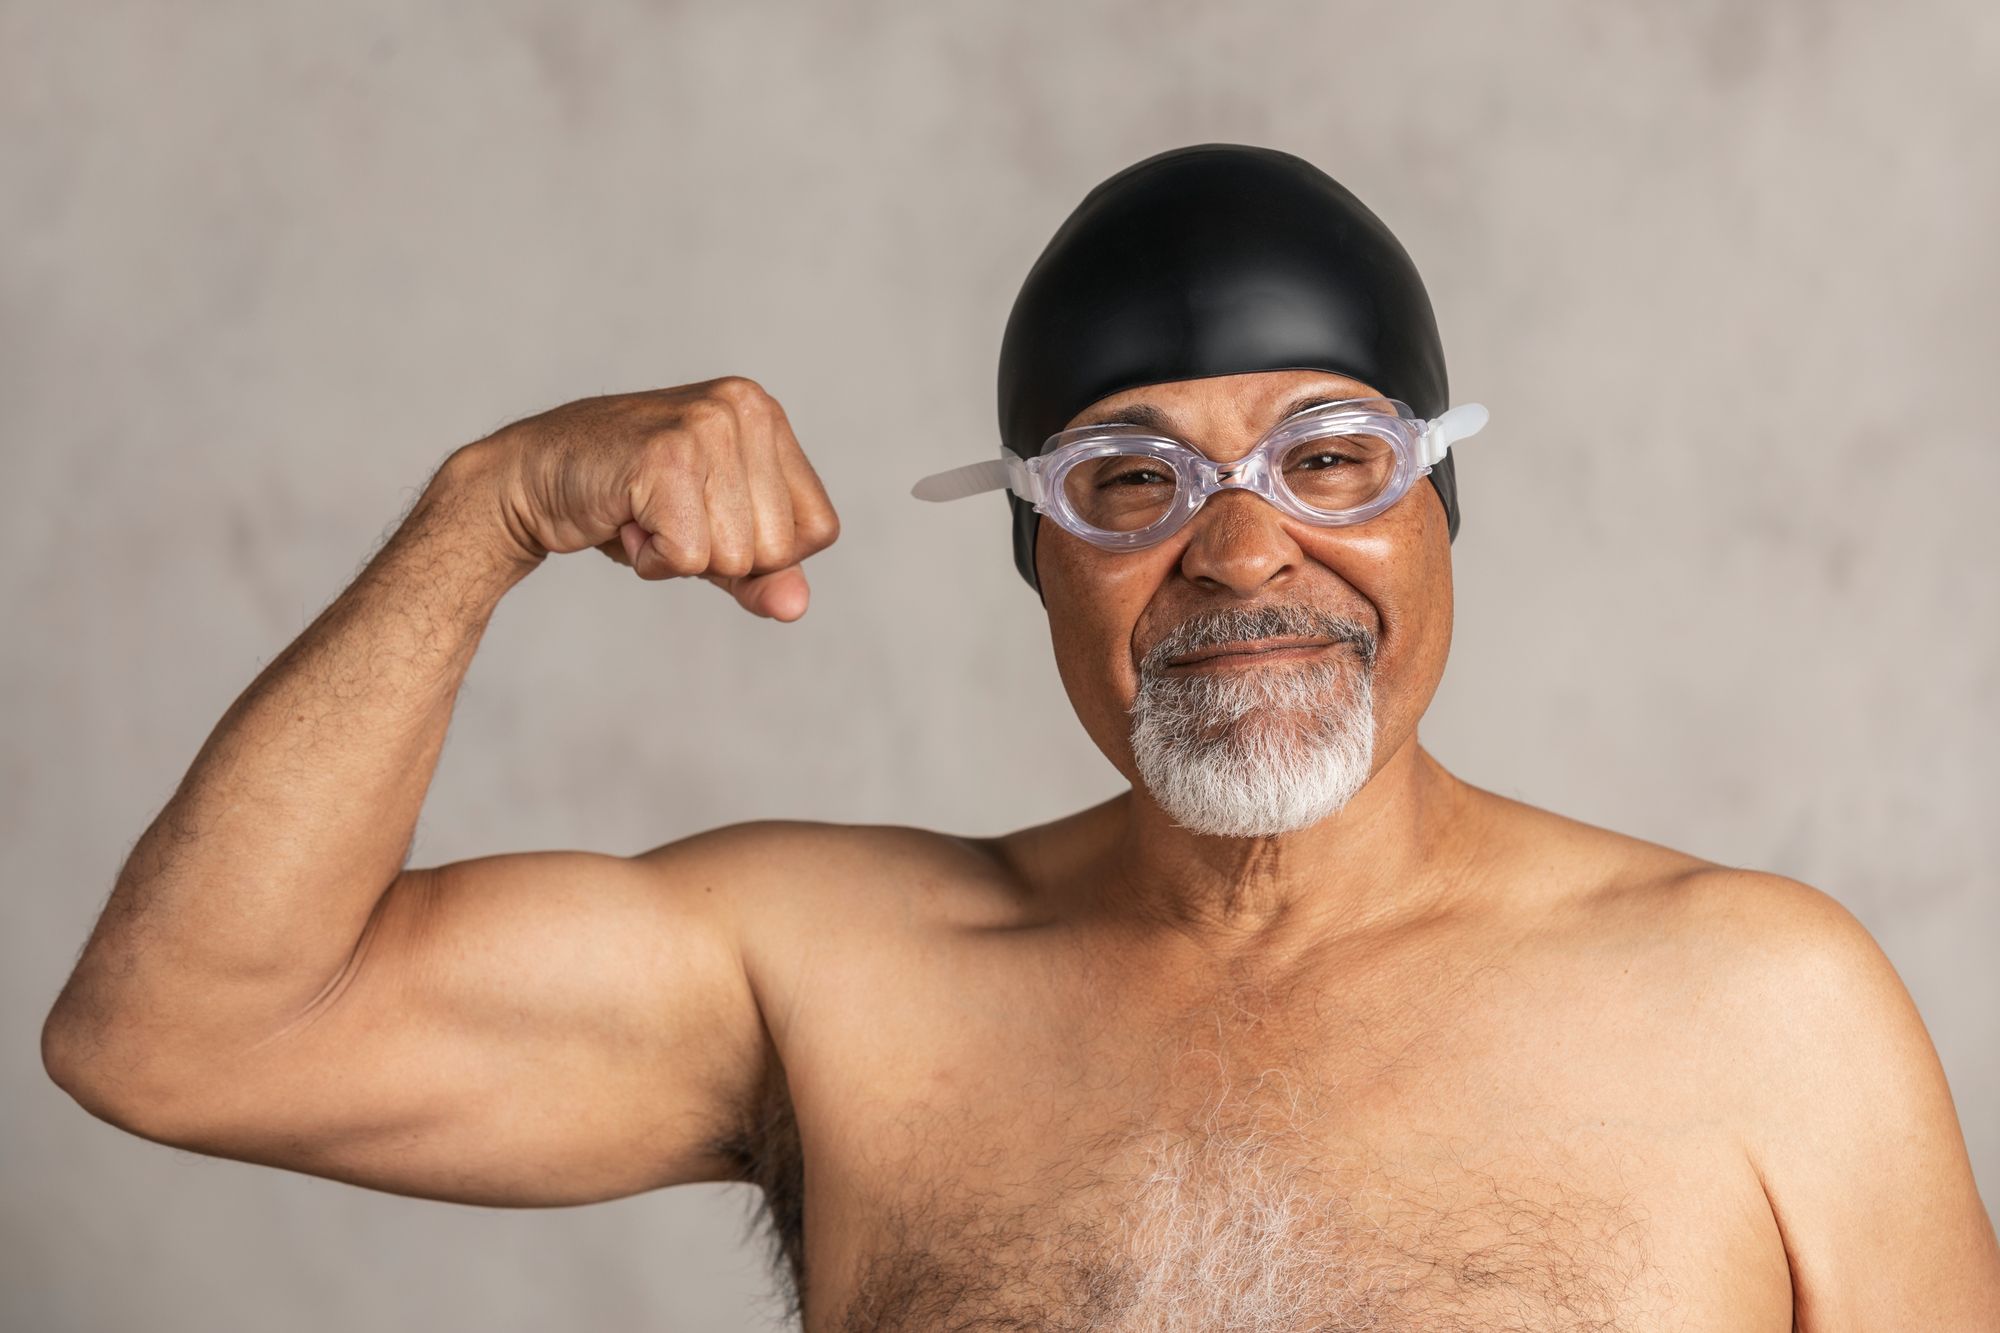 Can Older Adults Build Muscle? (Is “Old Muscle” Inferior?)